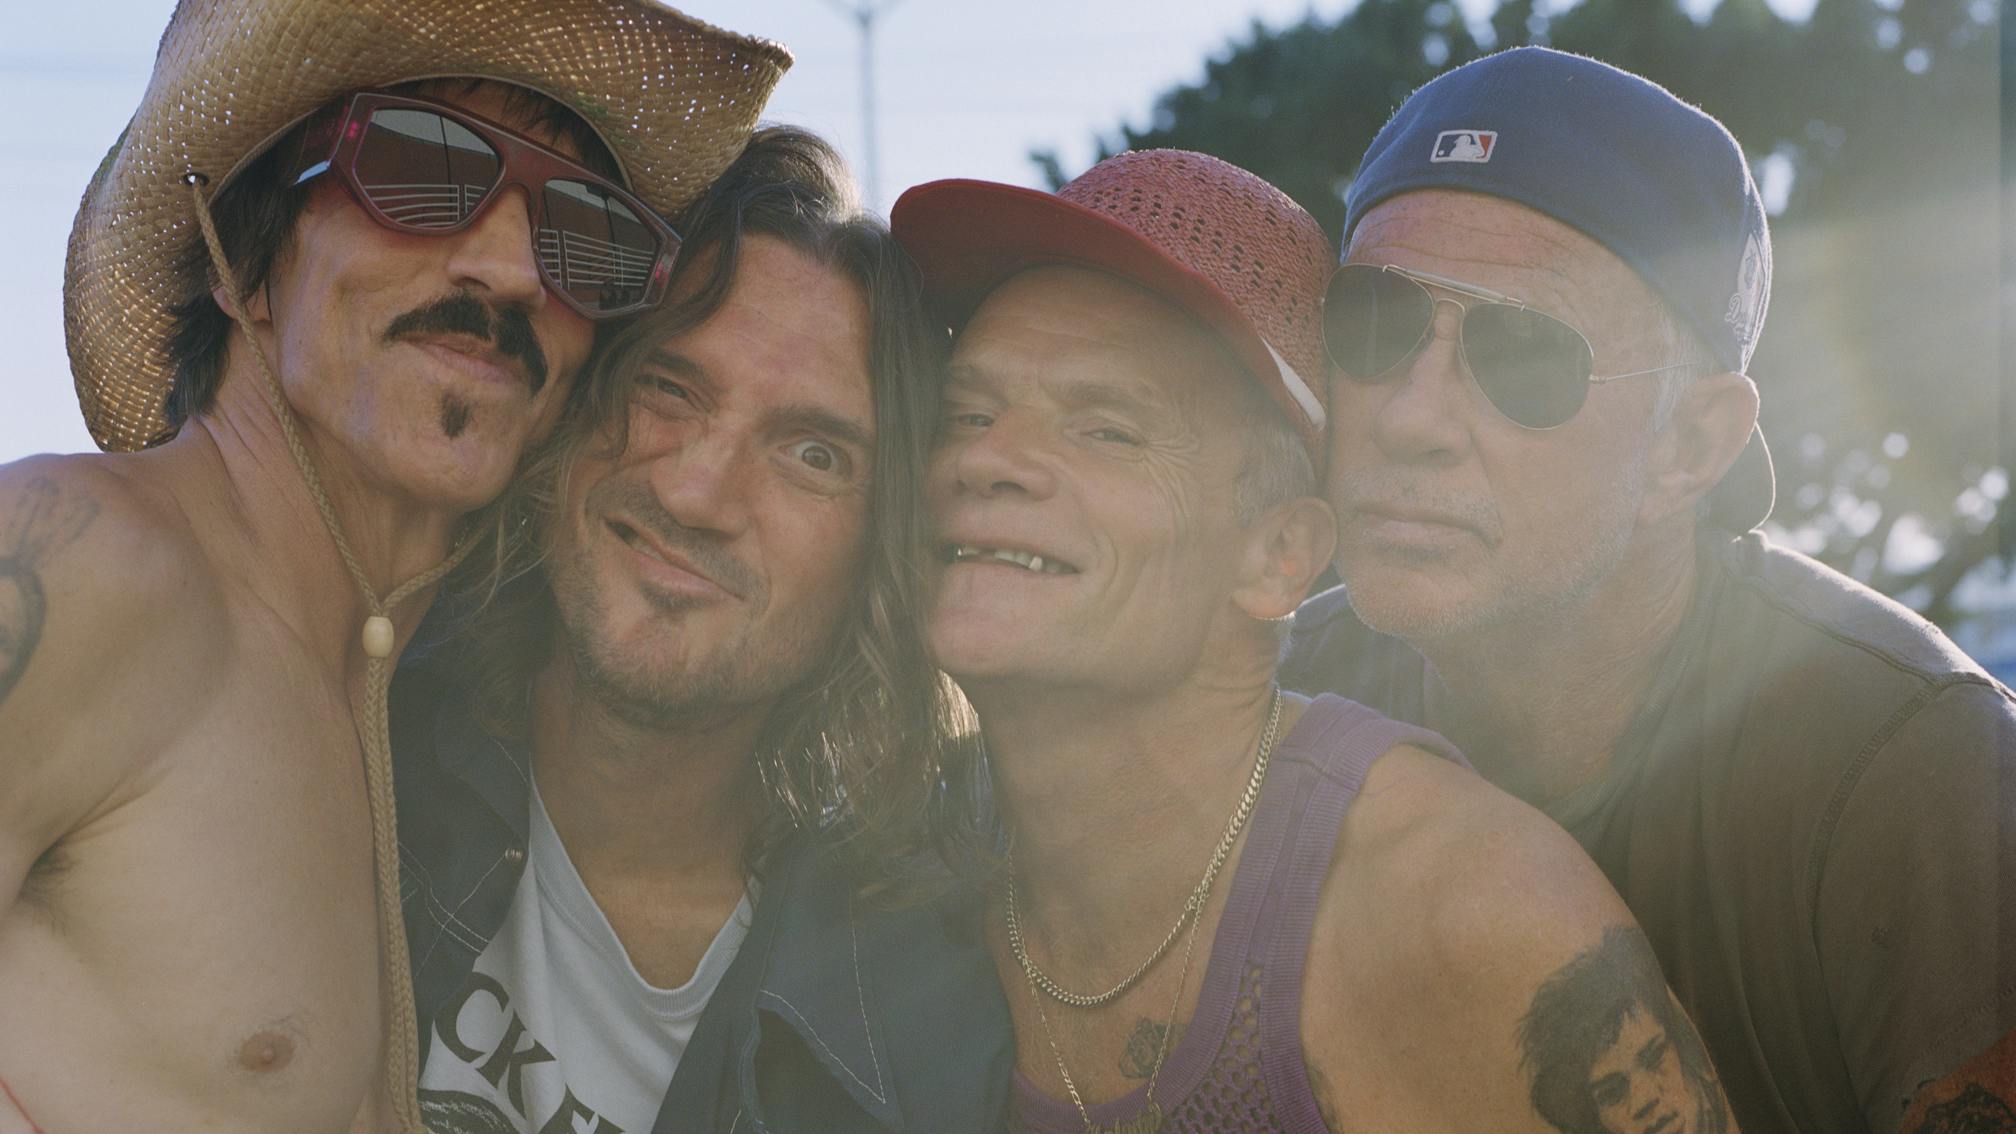 Red Hot Chili Peppers postpone tonight’s Glasgow gig due to illness